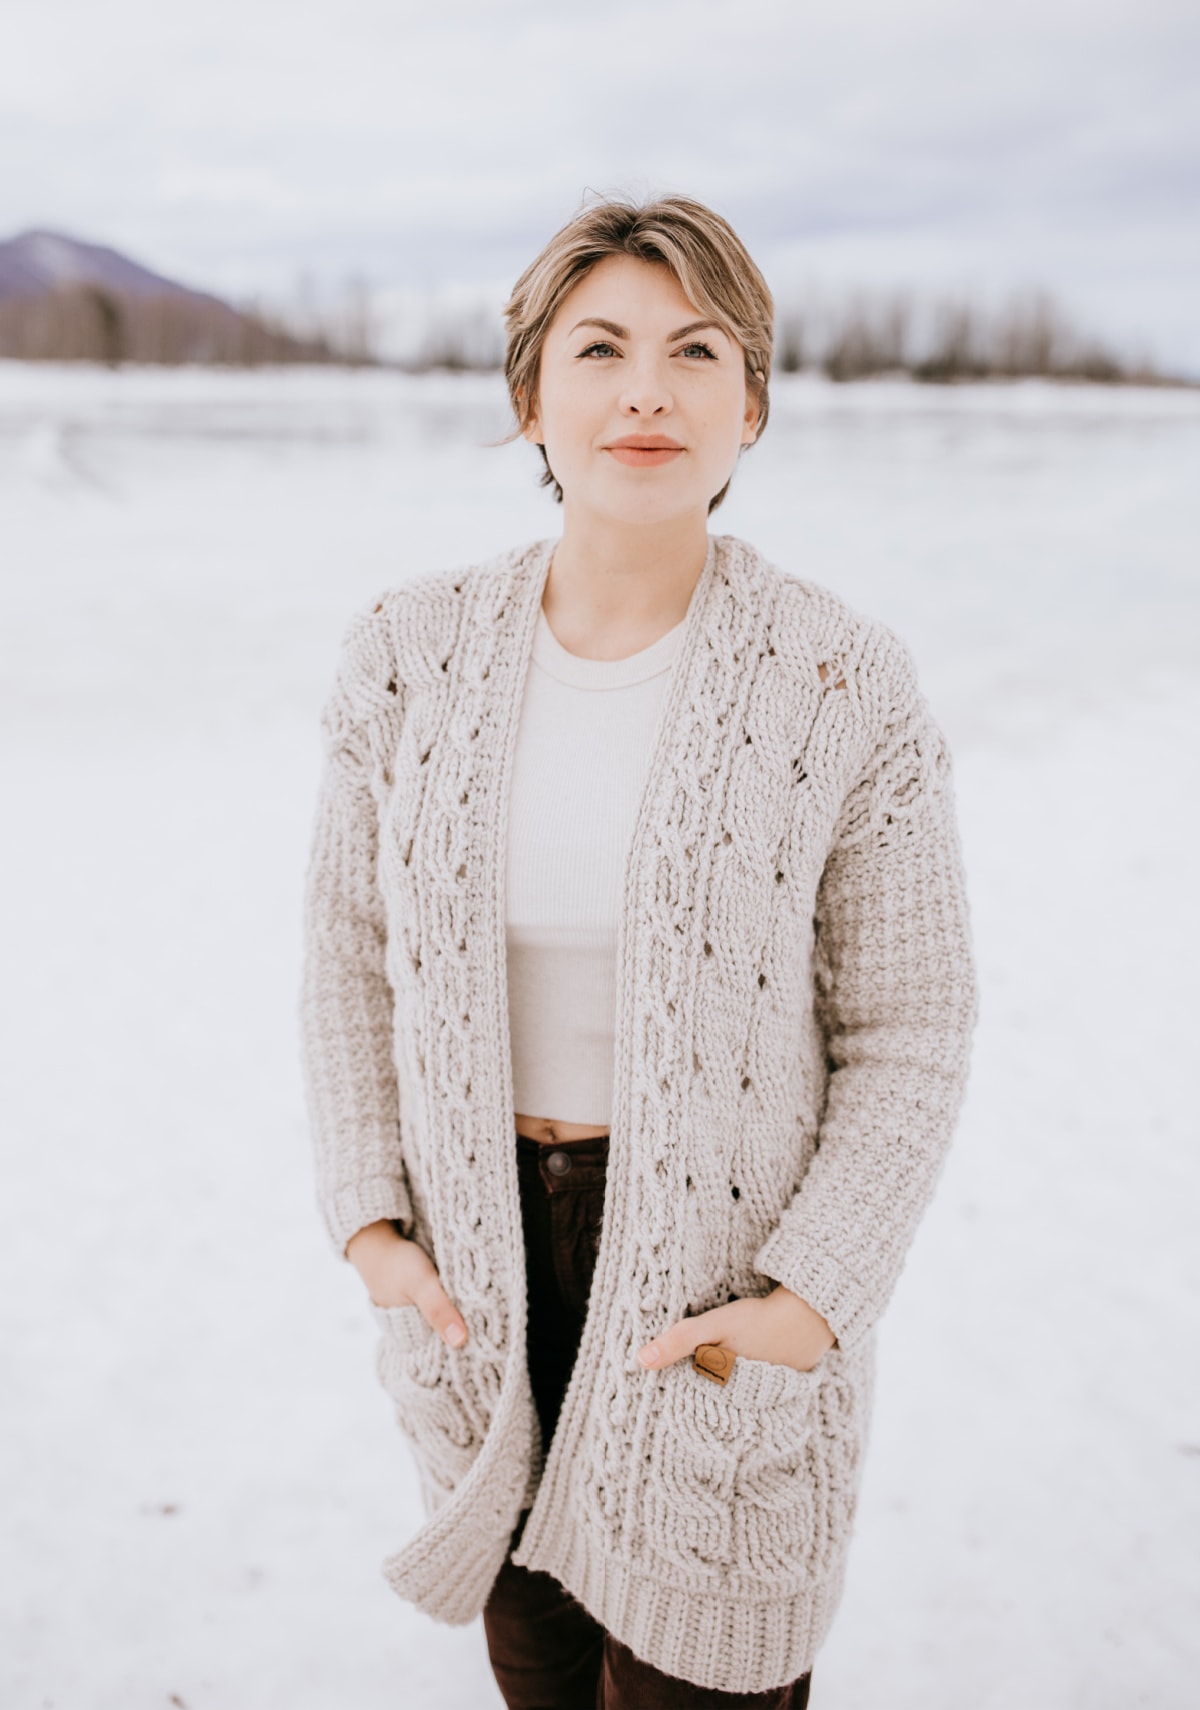 Woman with short hair modeling crochet cardigan near icy lake.